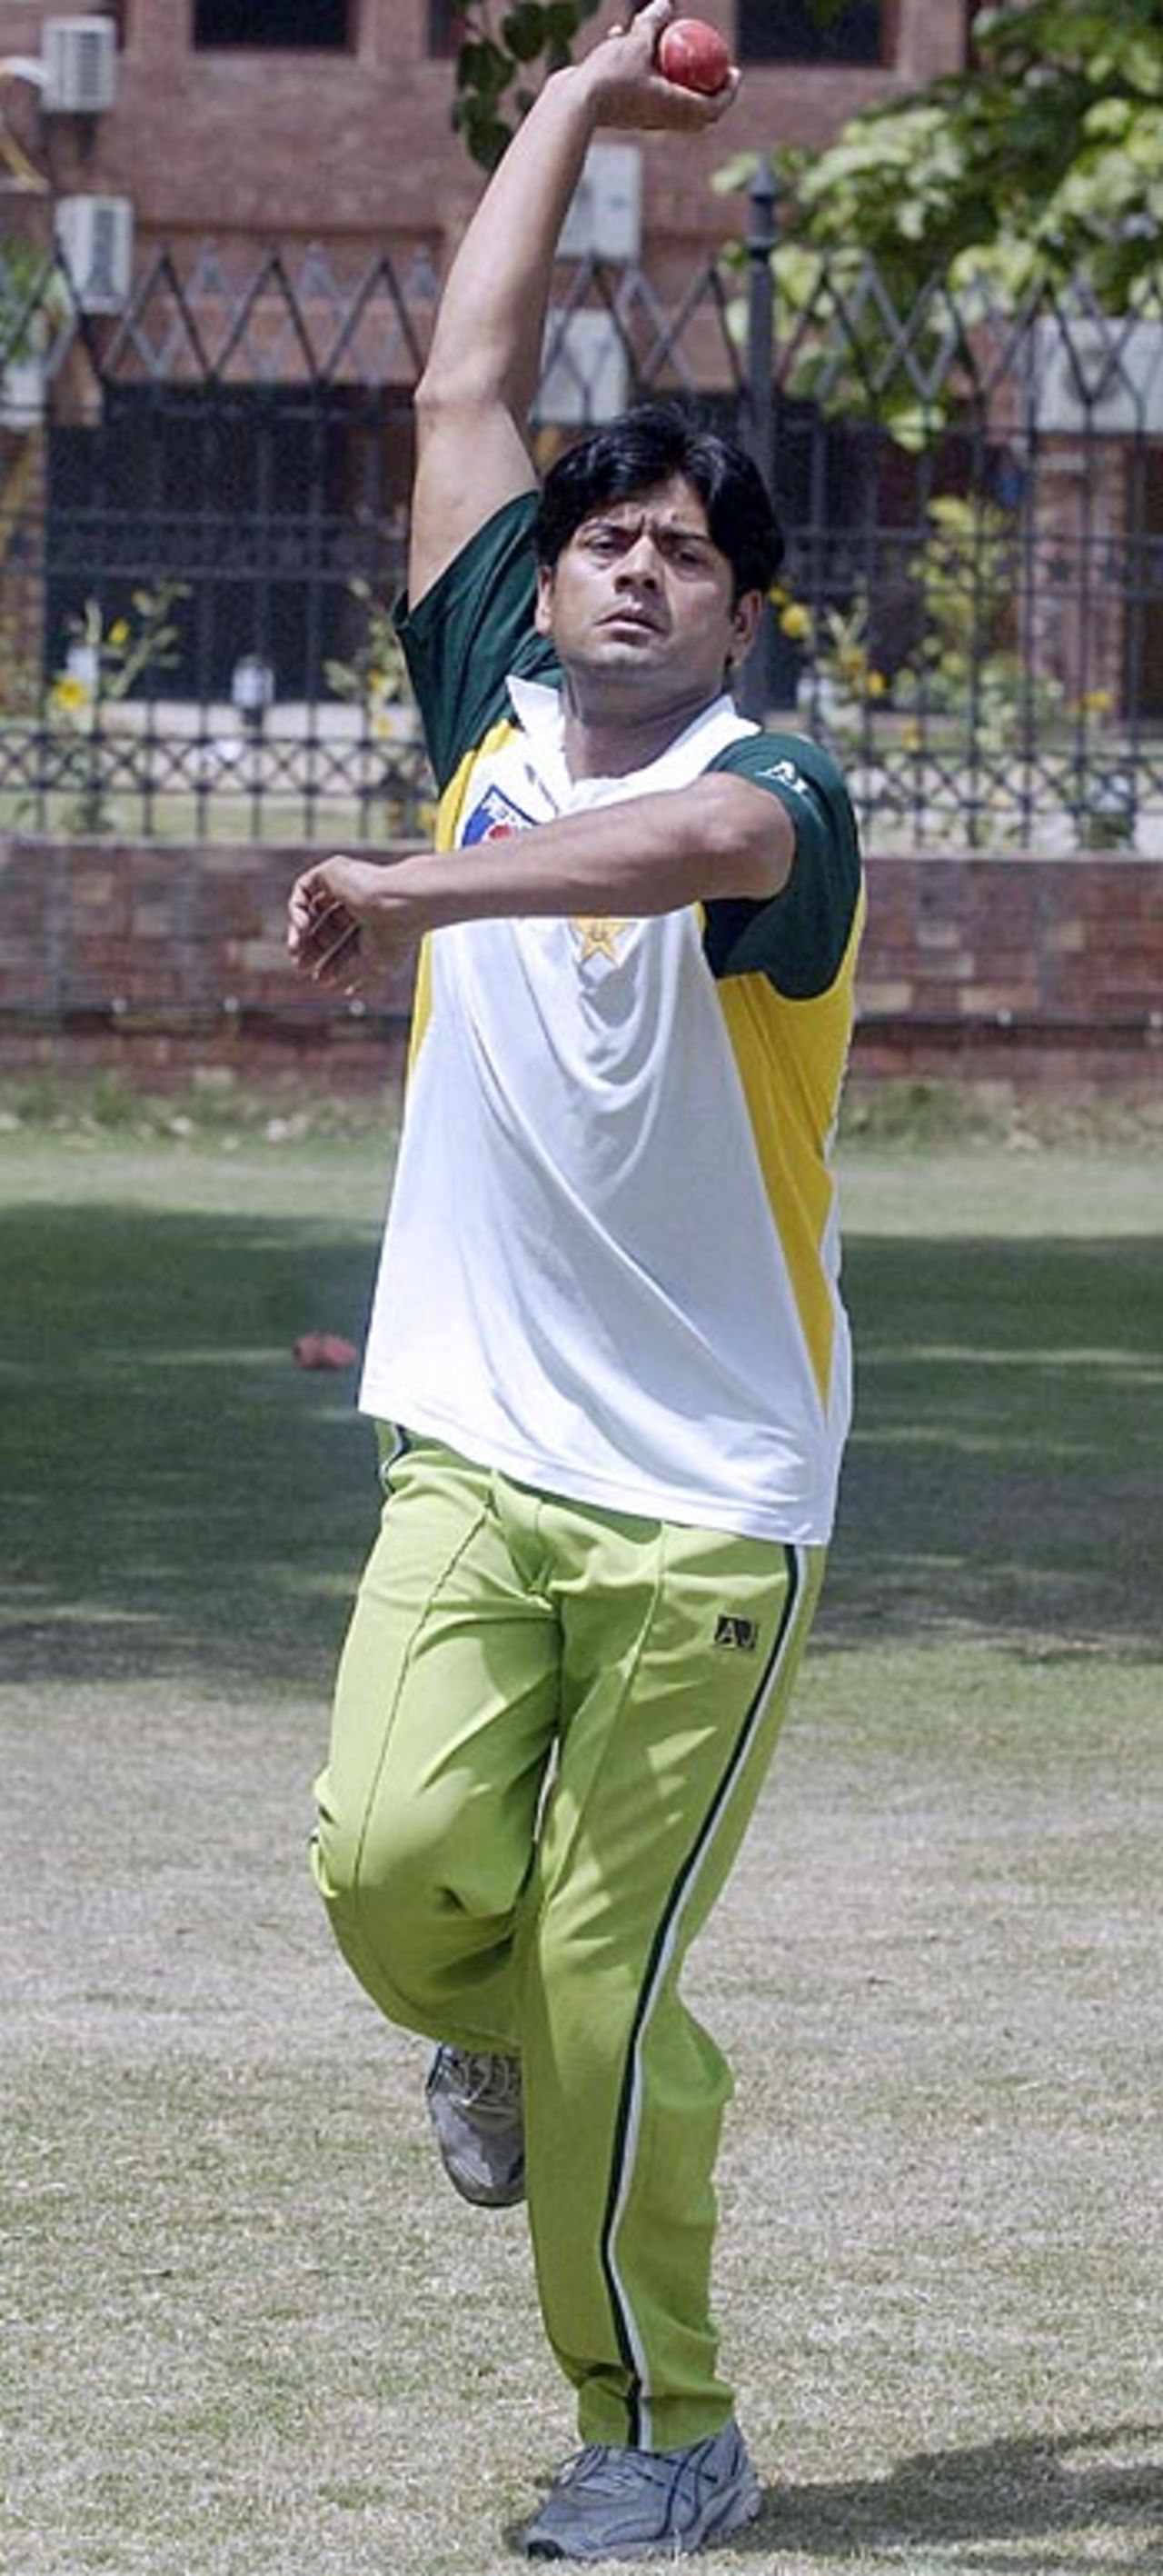 Shahid Nazir in the nets following his inclusion in the tour squad, Lahore, June 9, 2006